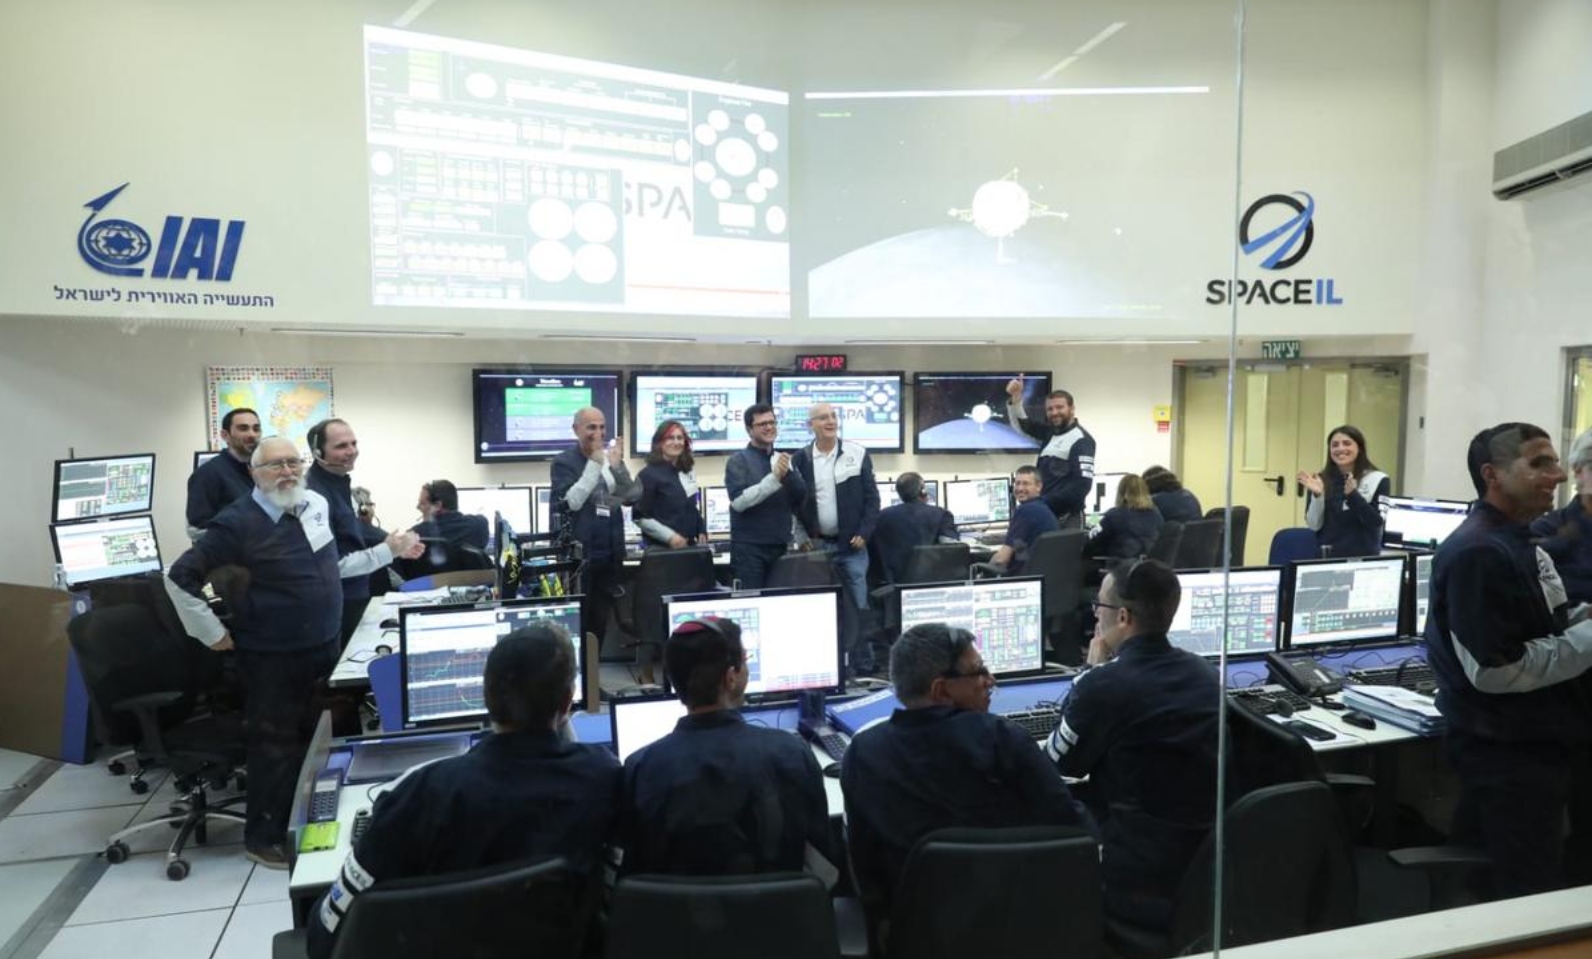 SpaceIL and IAI engineers celebrating lunar capture on April 4, 2019. Photo by Eliran Avital